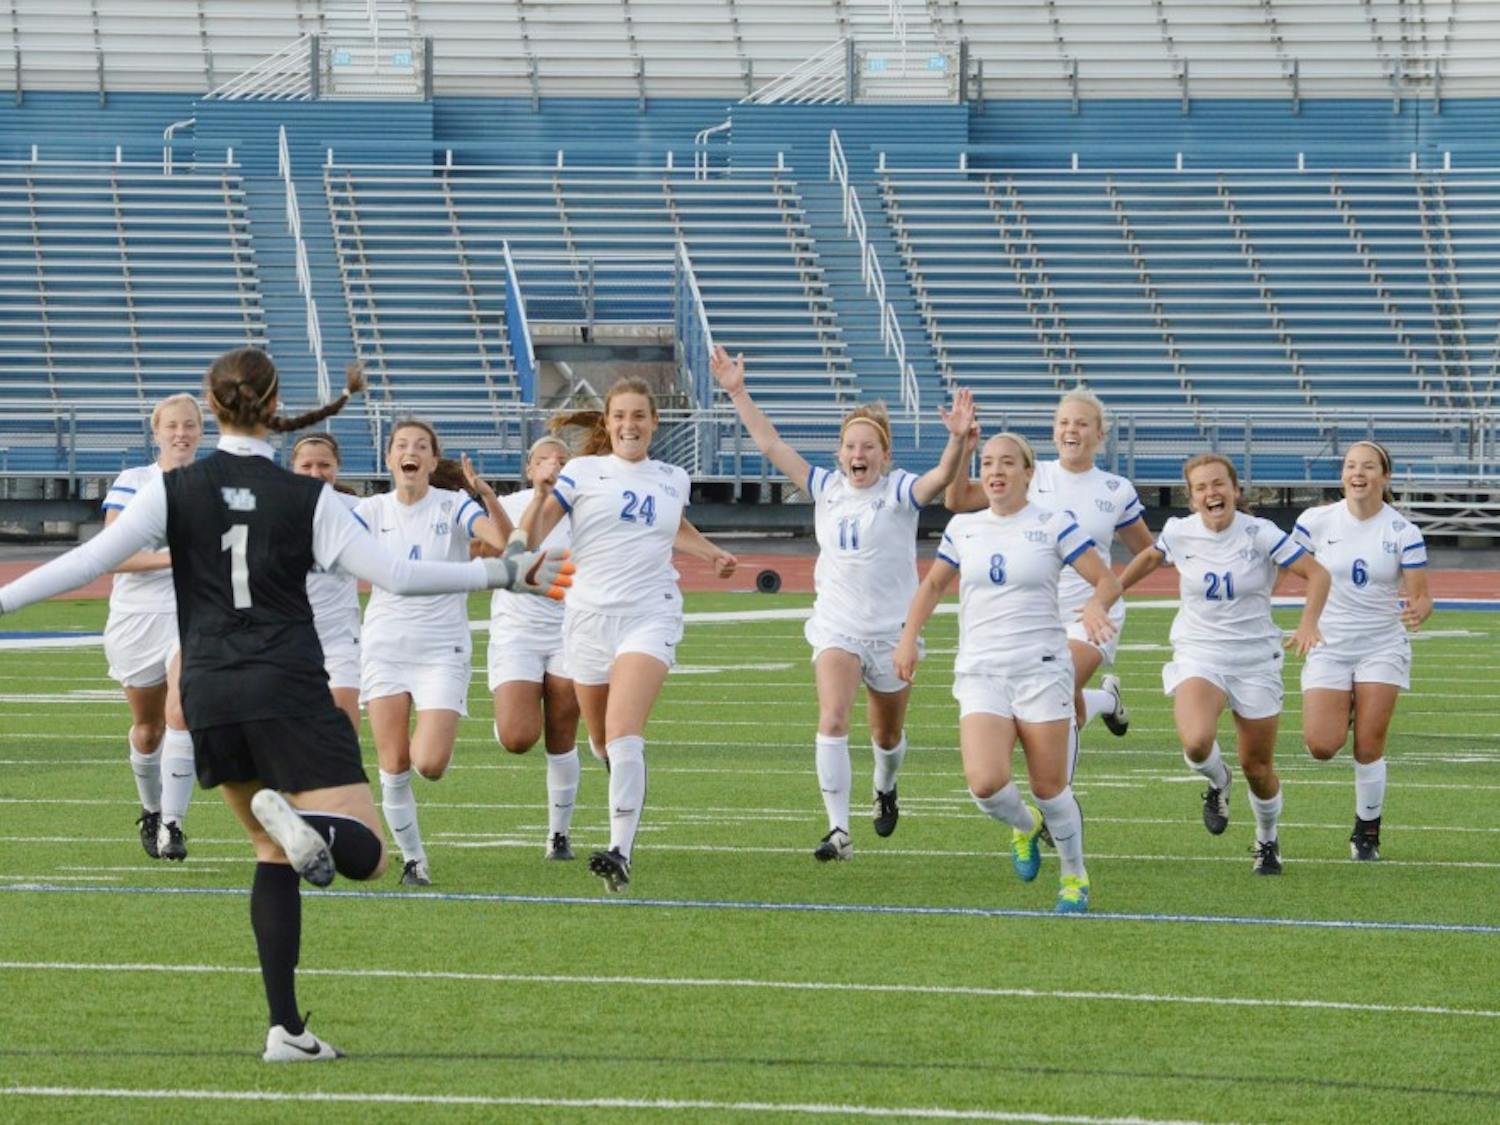 The women’s soccer team rushes to celebrate with sophomore goalkeeper Laura Dougall (1) after a win over Central Michigan in the MAC Quarterfinals at UB Stadium Sunday. Buffalo will advance to the MAC Semifinals against Western Michigan next weekend.